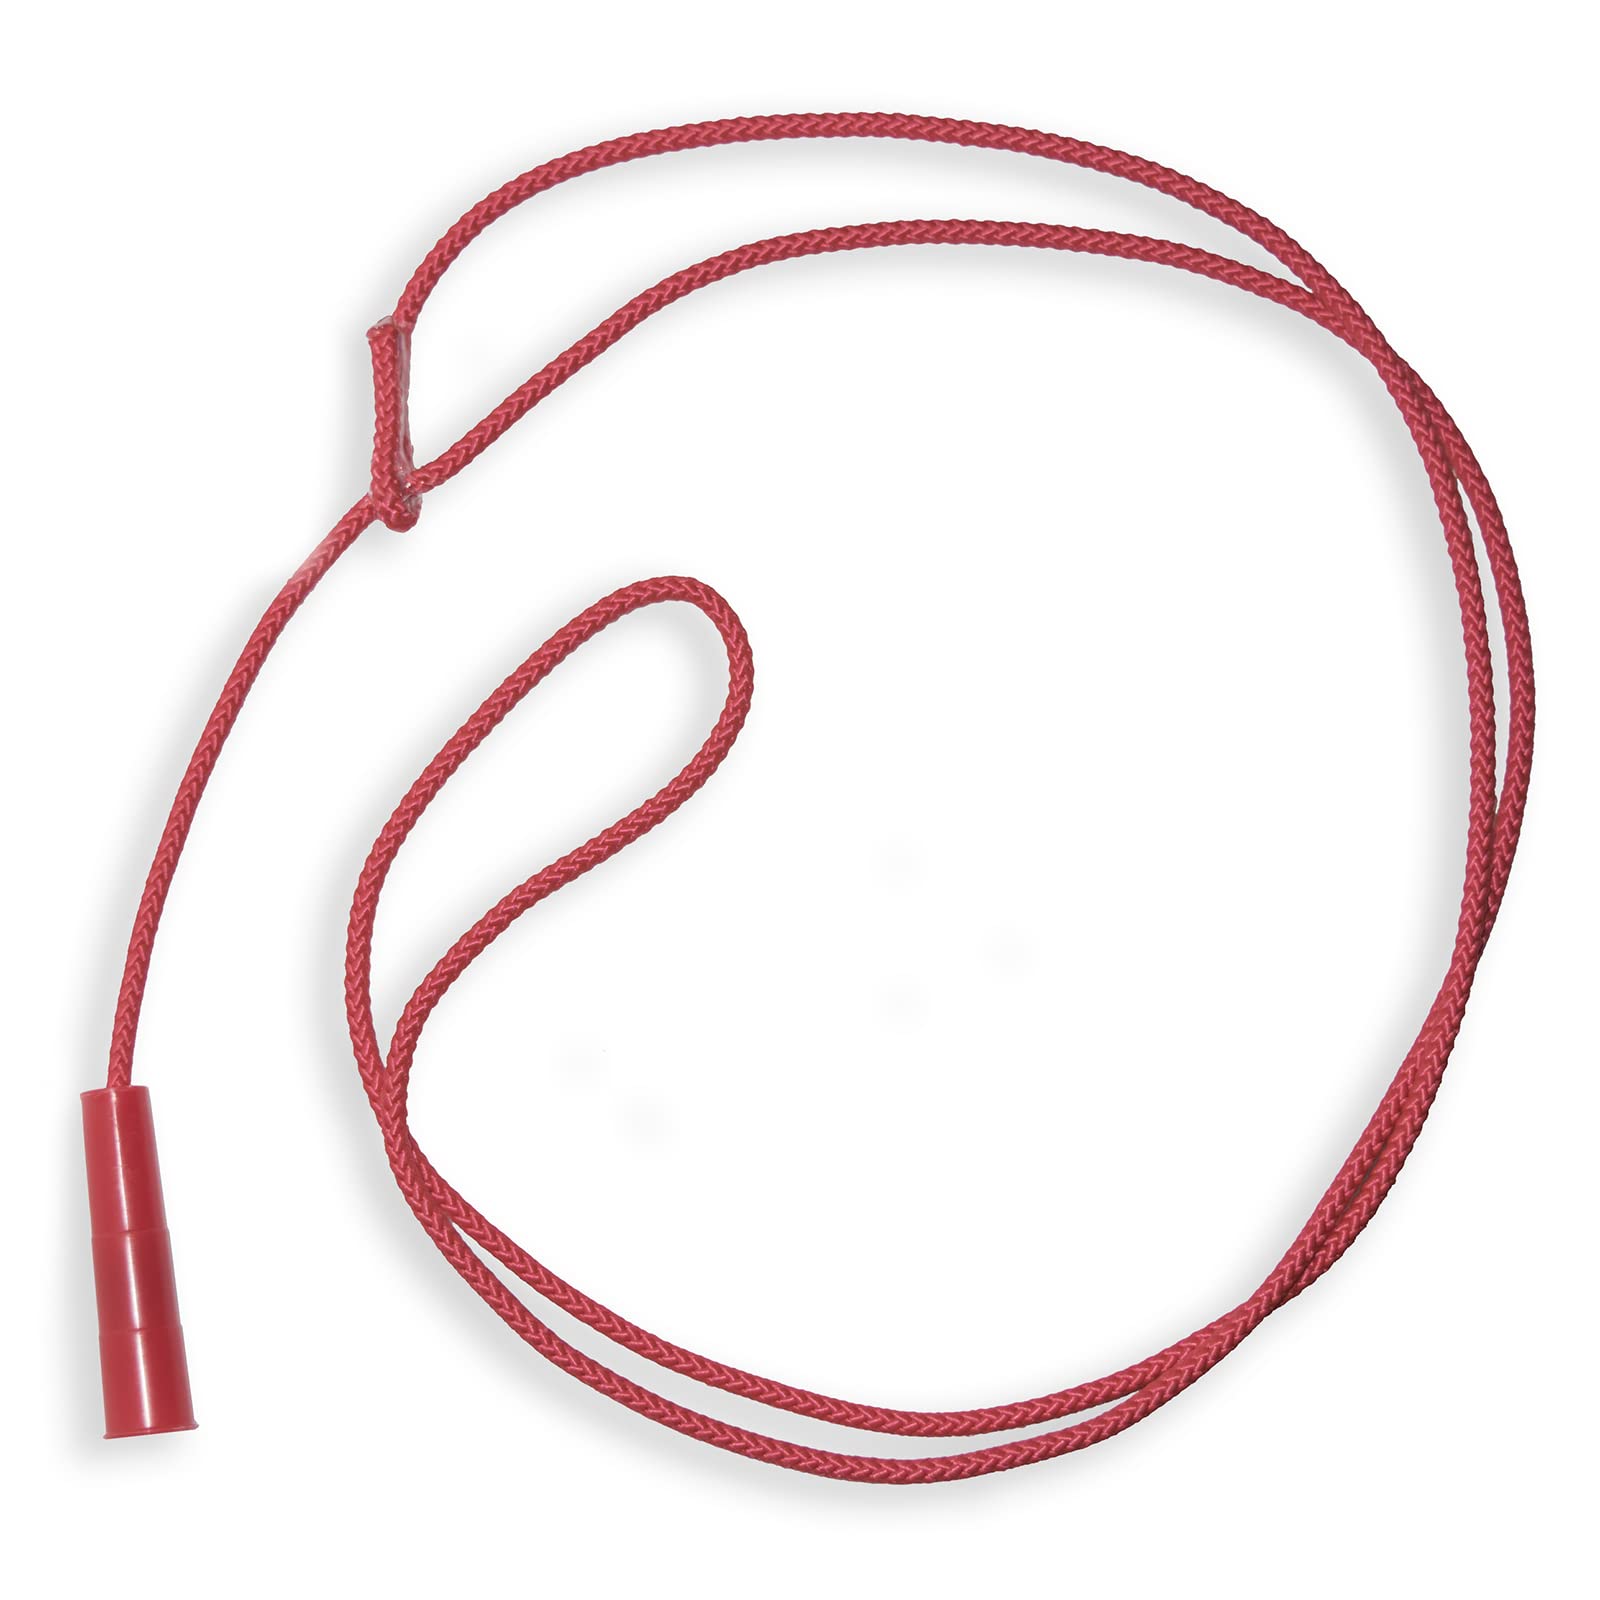 Western Stage Props Children's Cowboy Kiddie Trick Rope Lasso Pre-Tied, Ages 4-10, Red